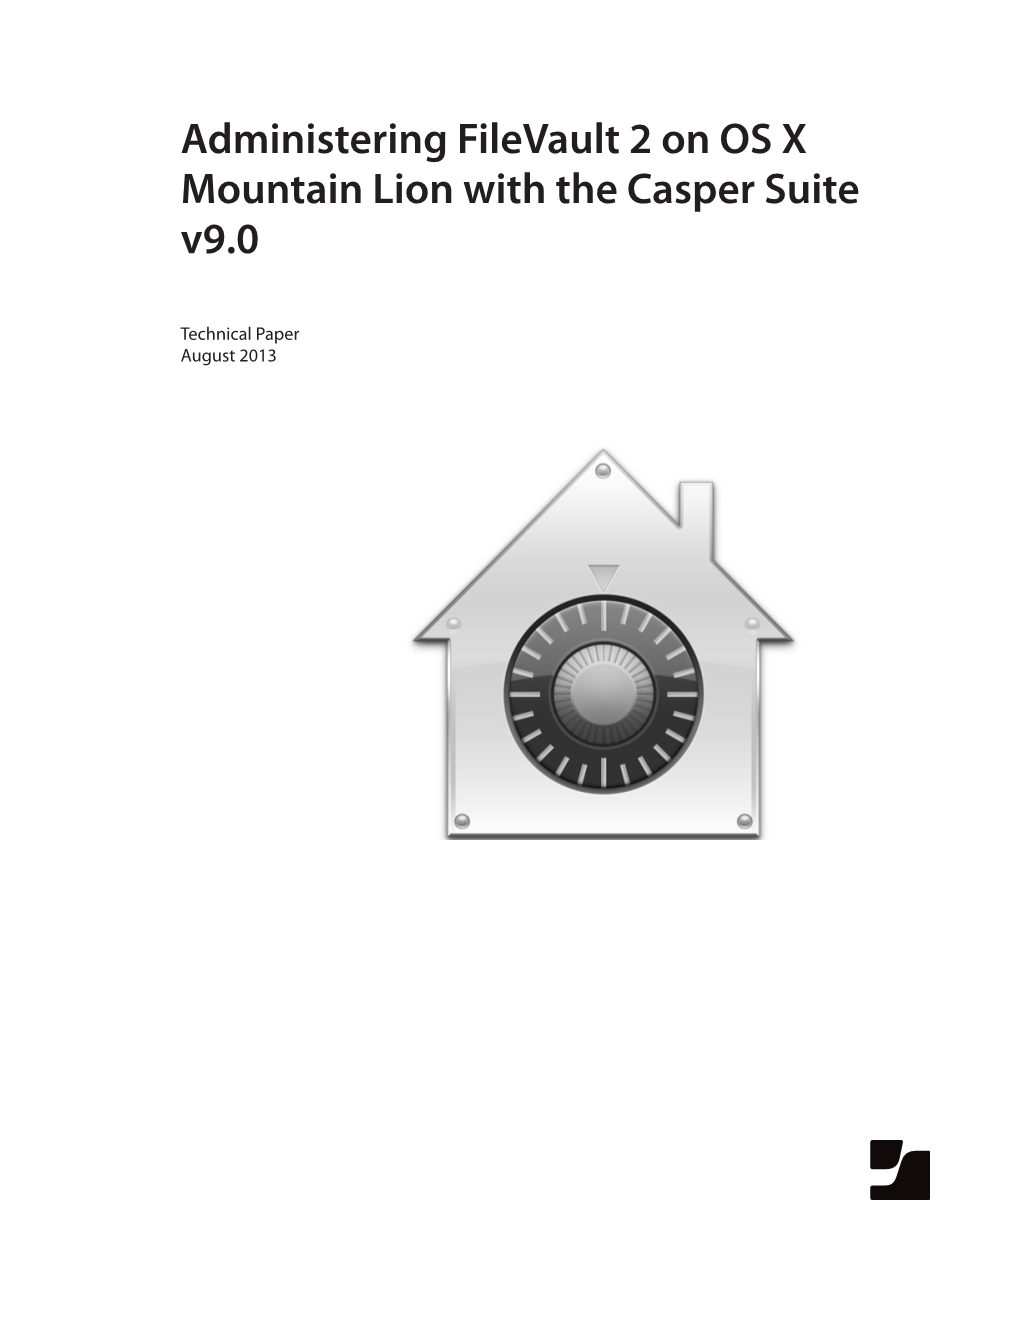 Administering Filevault 2 on OS X Mountain Lion with the Casper Suite V9.0